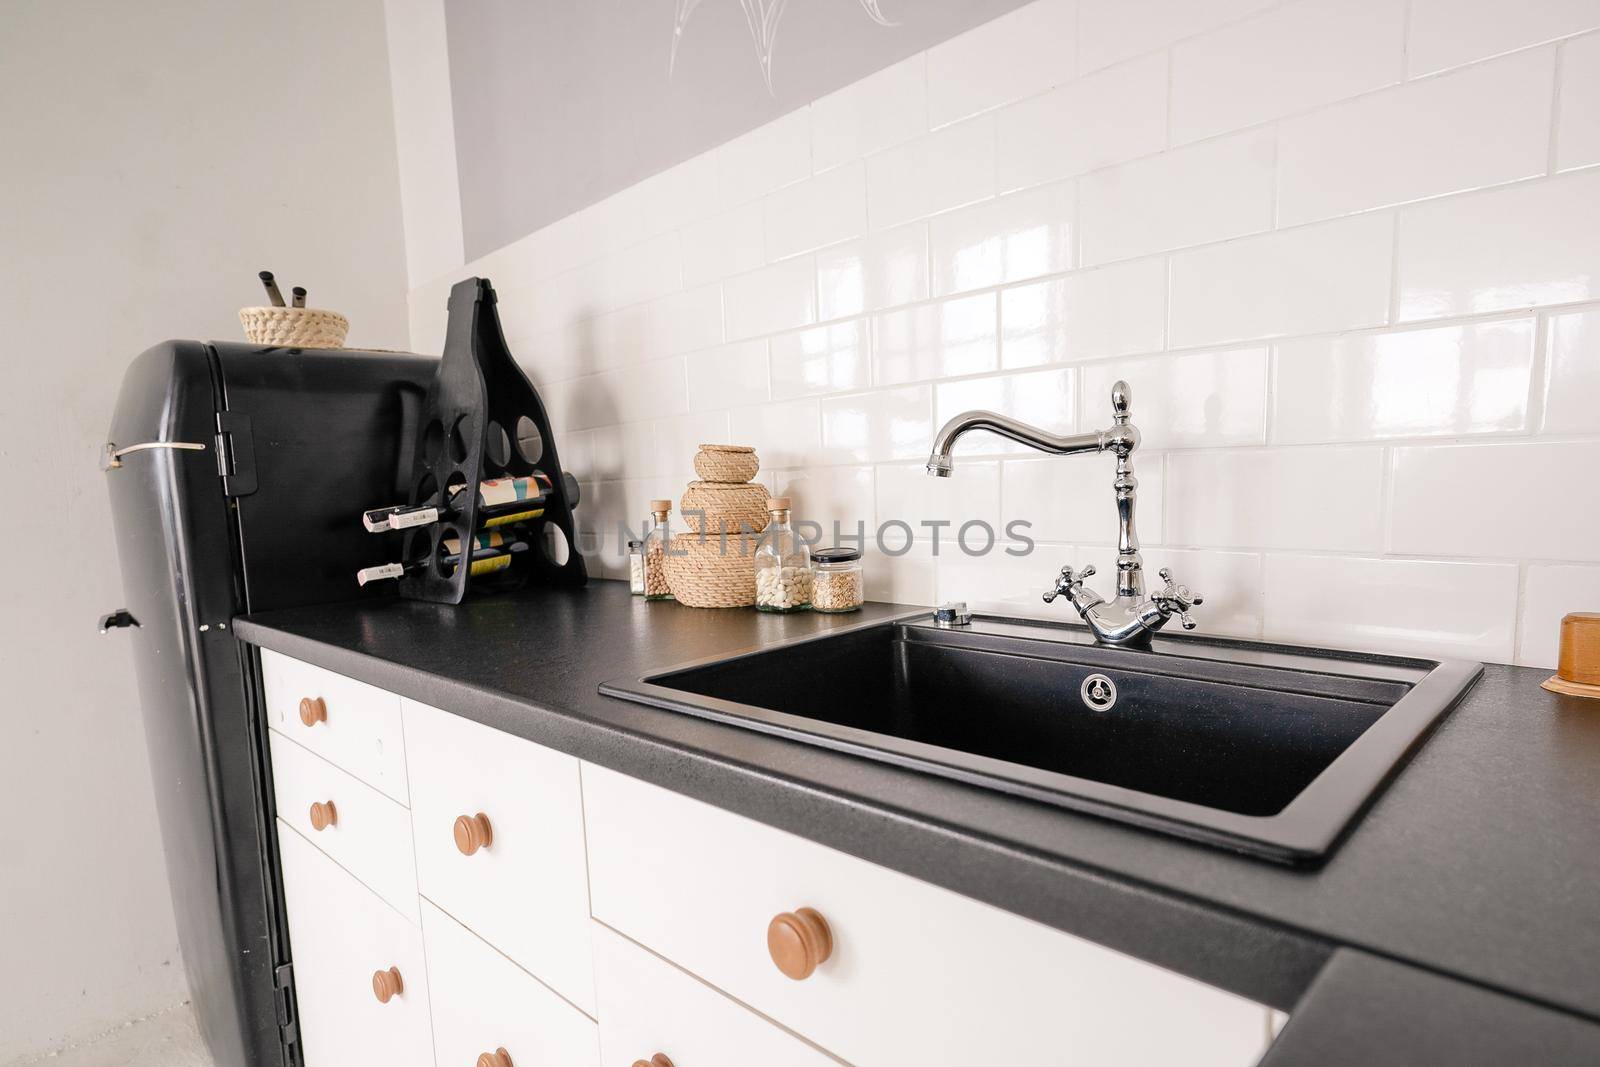 retro style black sink with tap for water in a light kitchen, kitchen furniture, black marble countertop, kitchen cabinet, white tiles on the wall. High quality photo